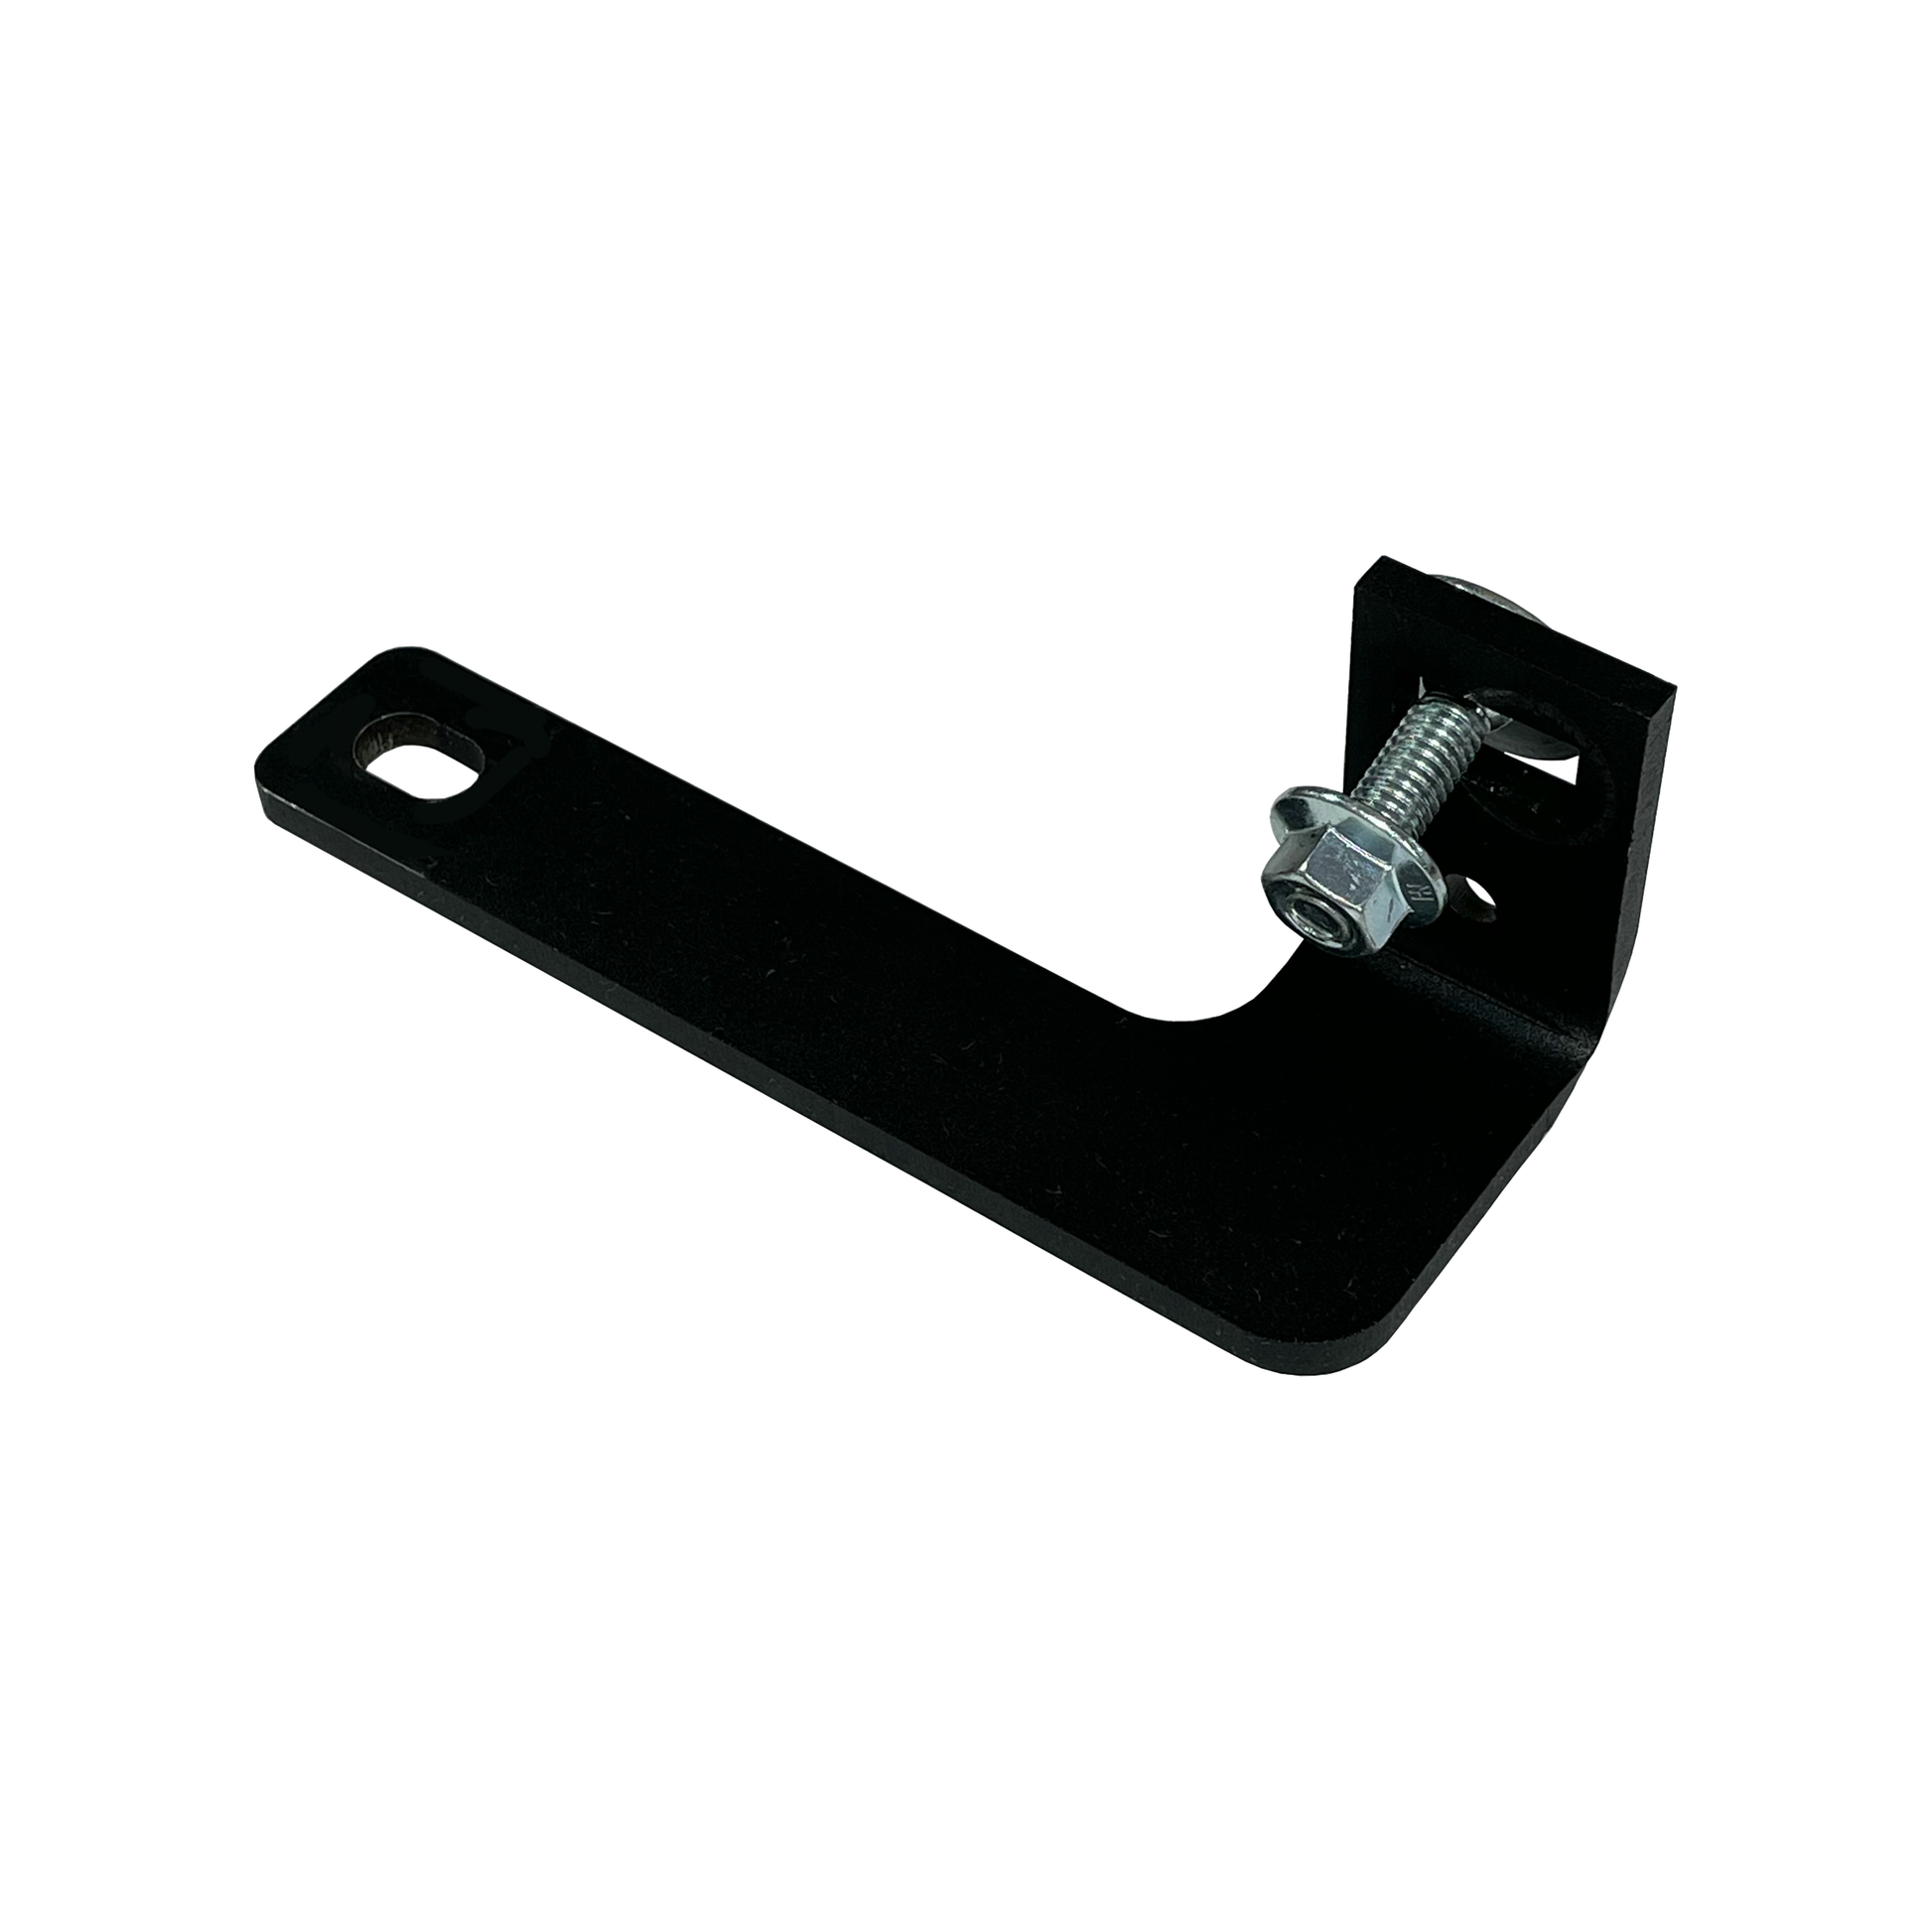 Lock Bars compatible with the Pennsylvania Skill Spartan. Sold by Miele Manufacturing.